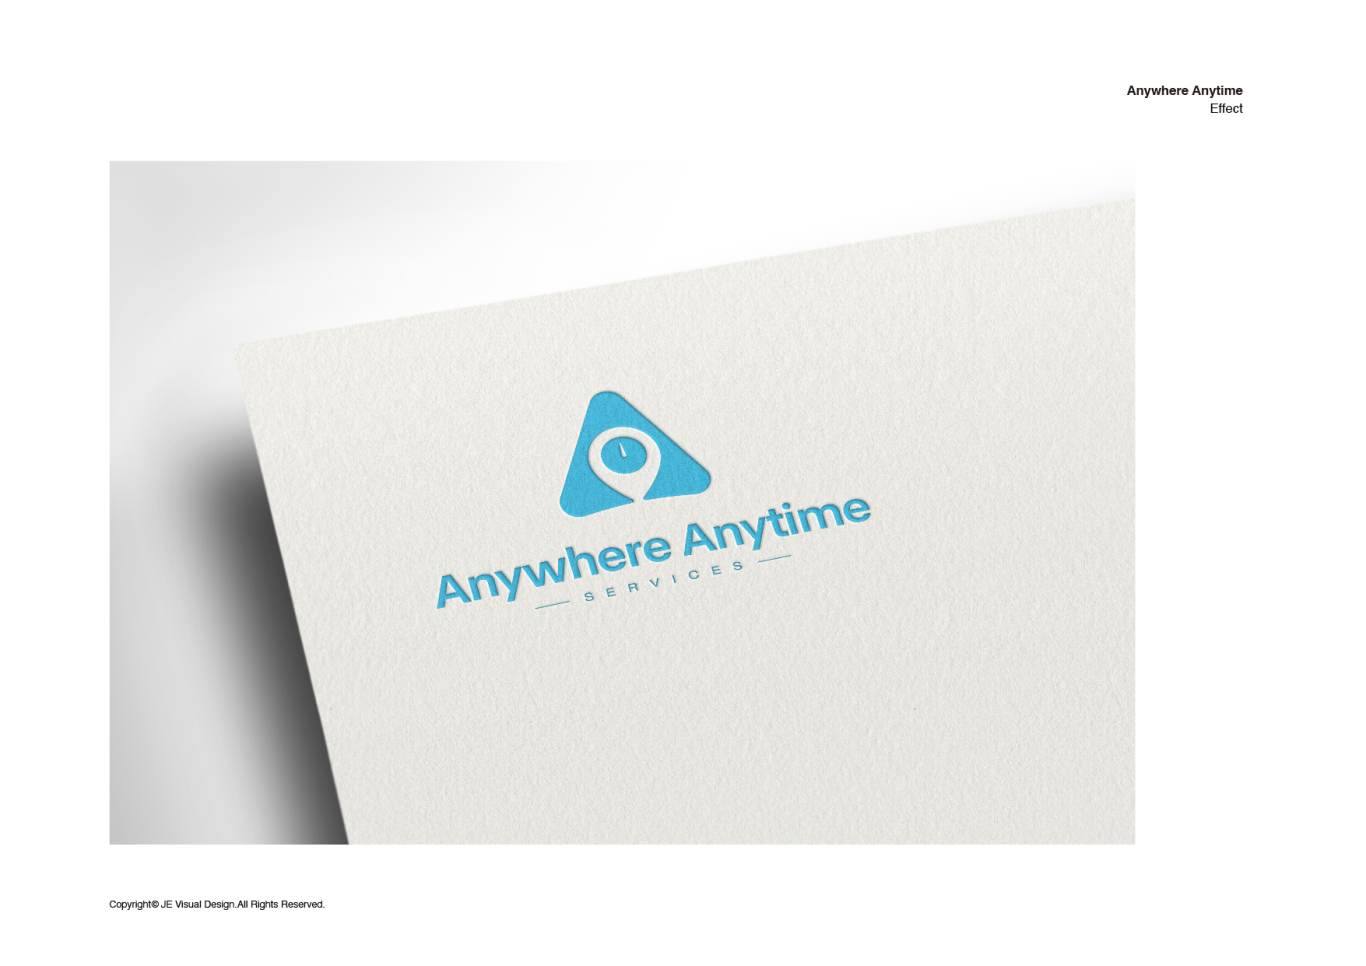 Anywhere Anytime logo设计图9